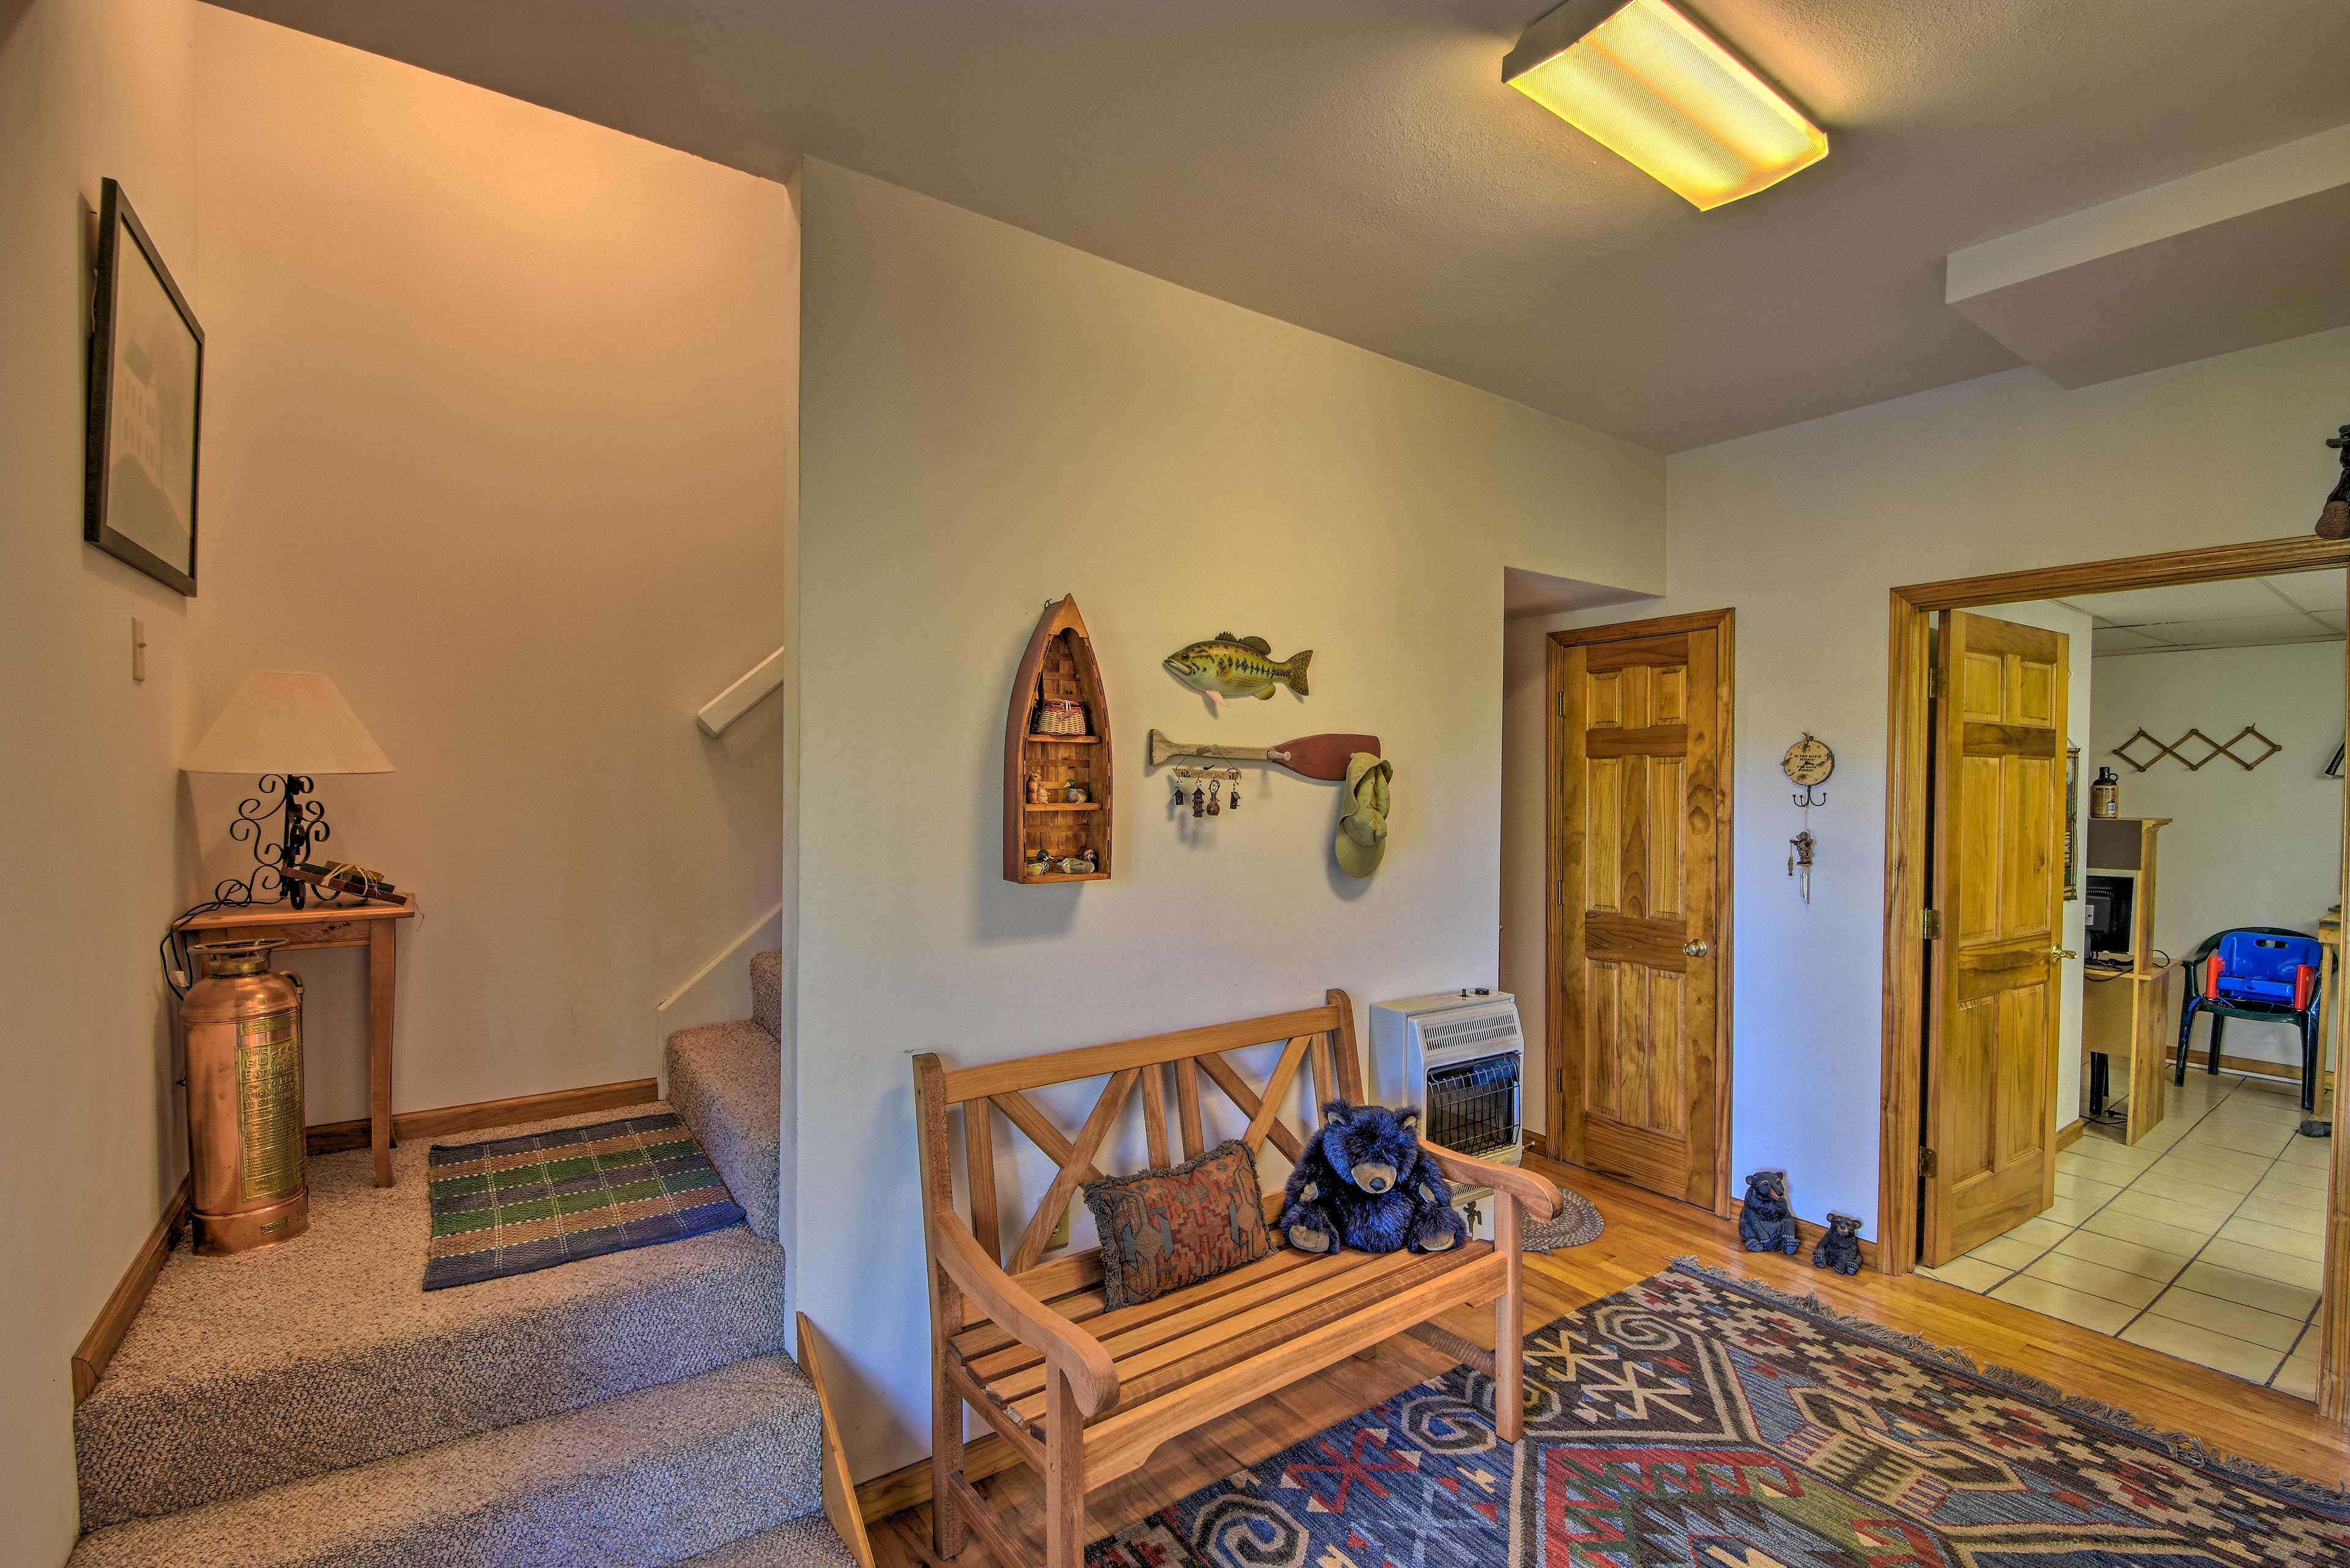 Head downstairs to explore the rest of this spacious home!